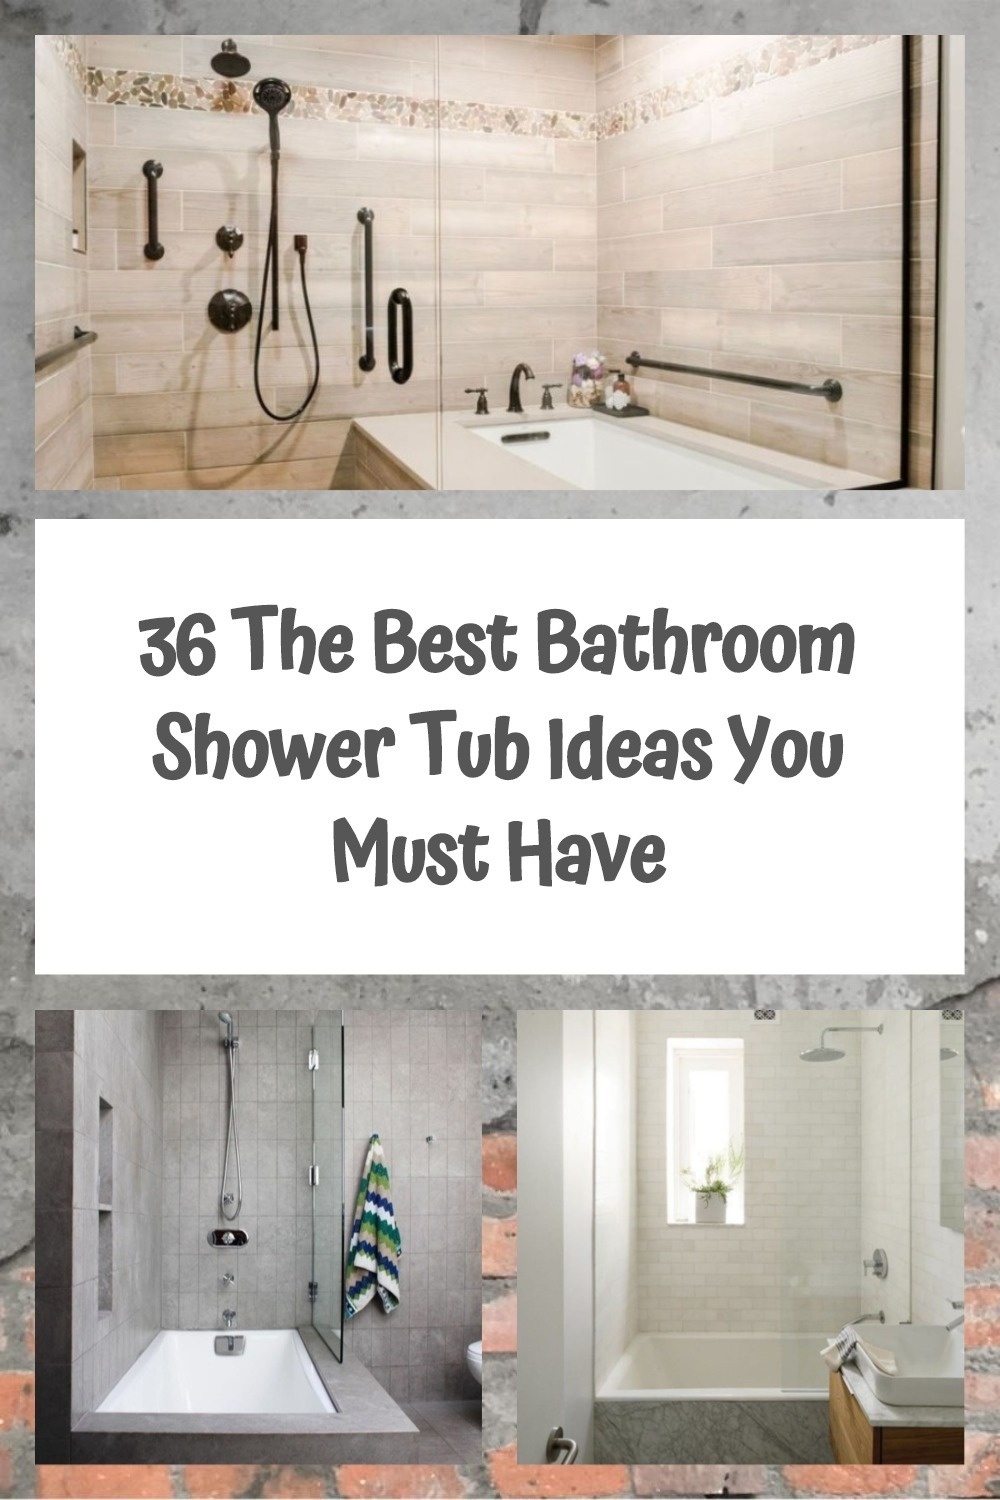 36 The Best Bathroom Shower Tub Ideas You Must Have